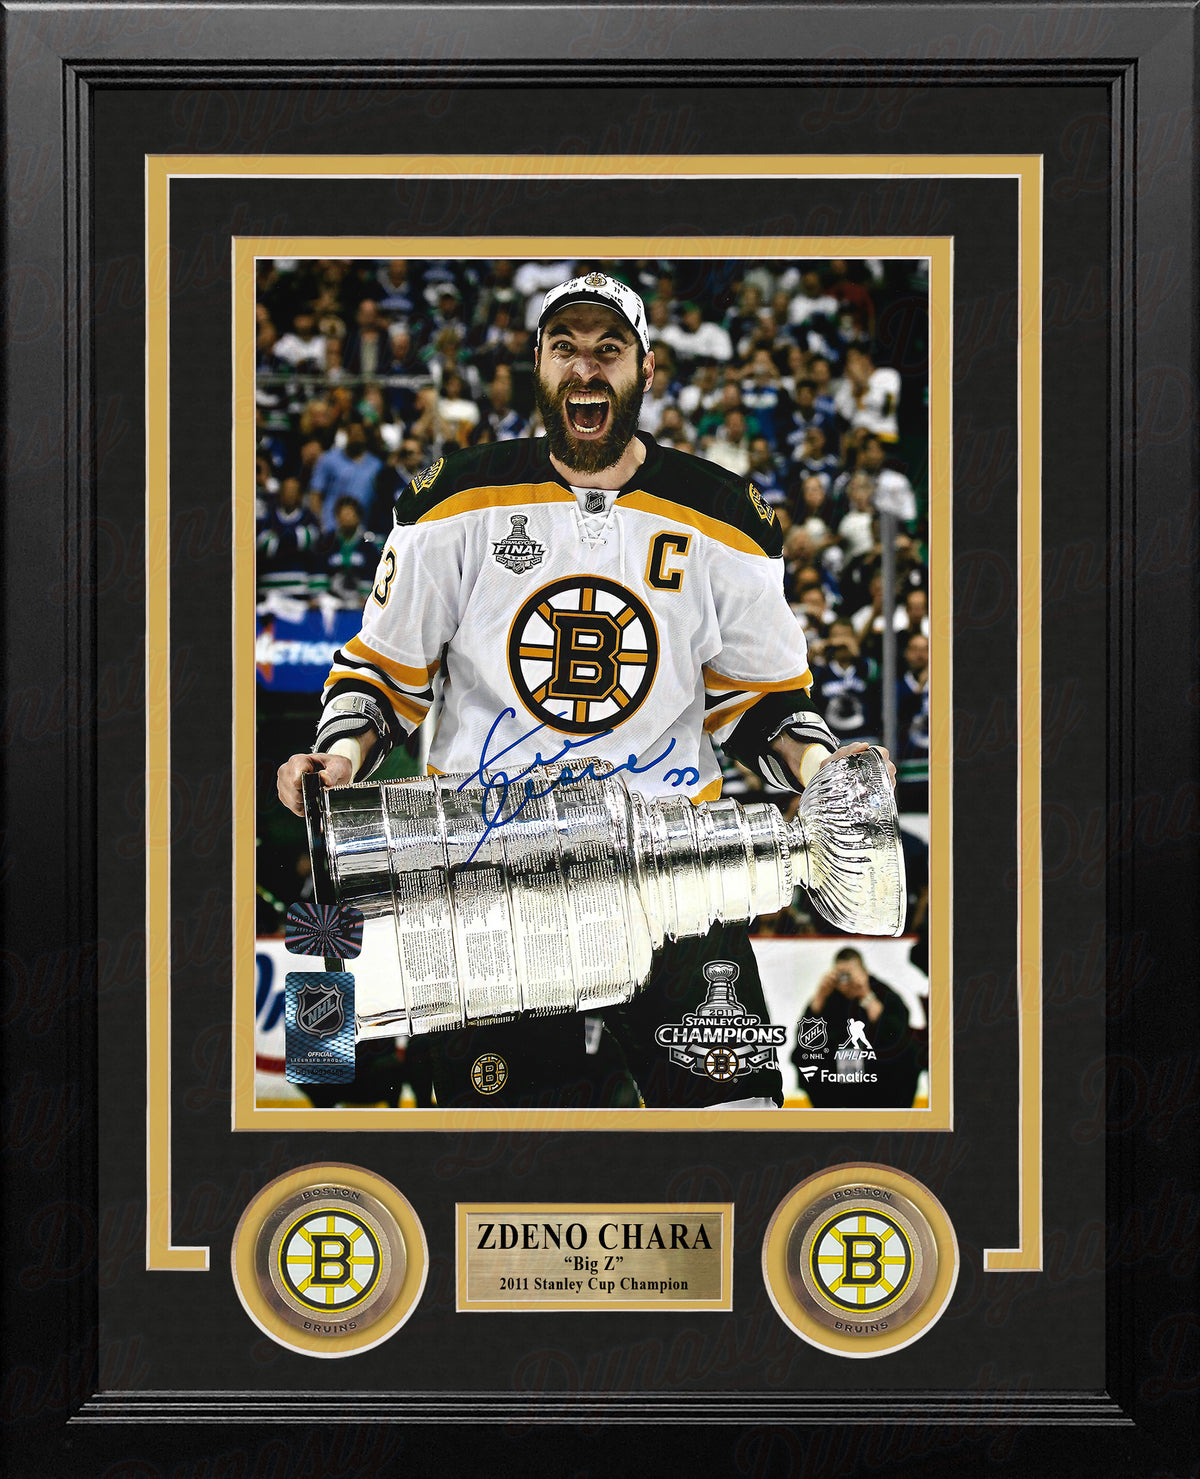 https://www.shopdynastysports.shop/wp-content/uploads/1690/91/zdeno-chara-2011-stanley-cup-boston-bruins-autographed-framed-hockey-photo-dynasty-sports-check-us-out-on-the-internet-find-what-youre-searching-for_0.jpg